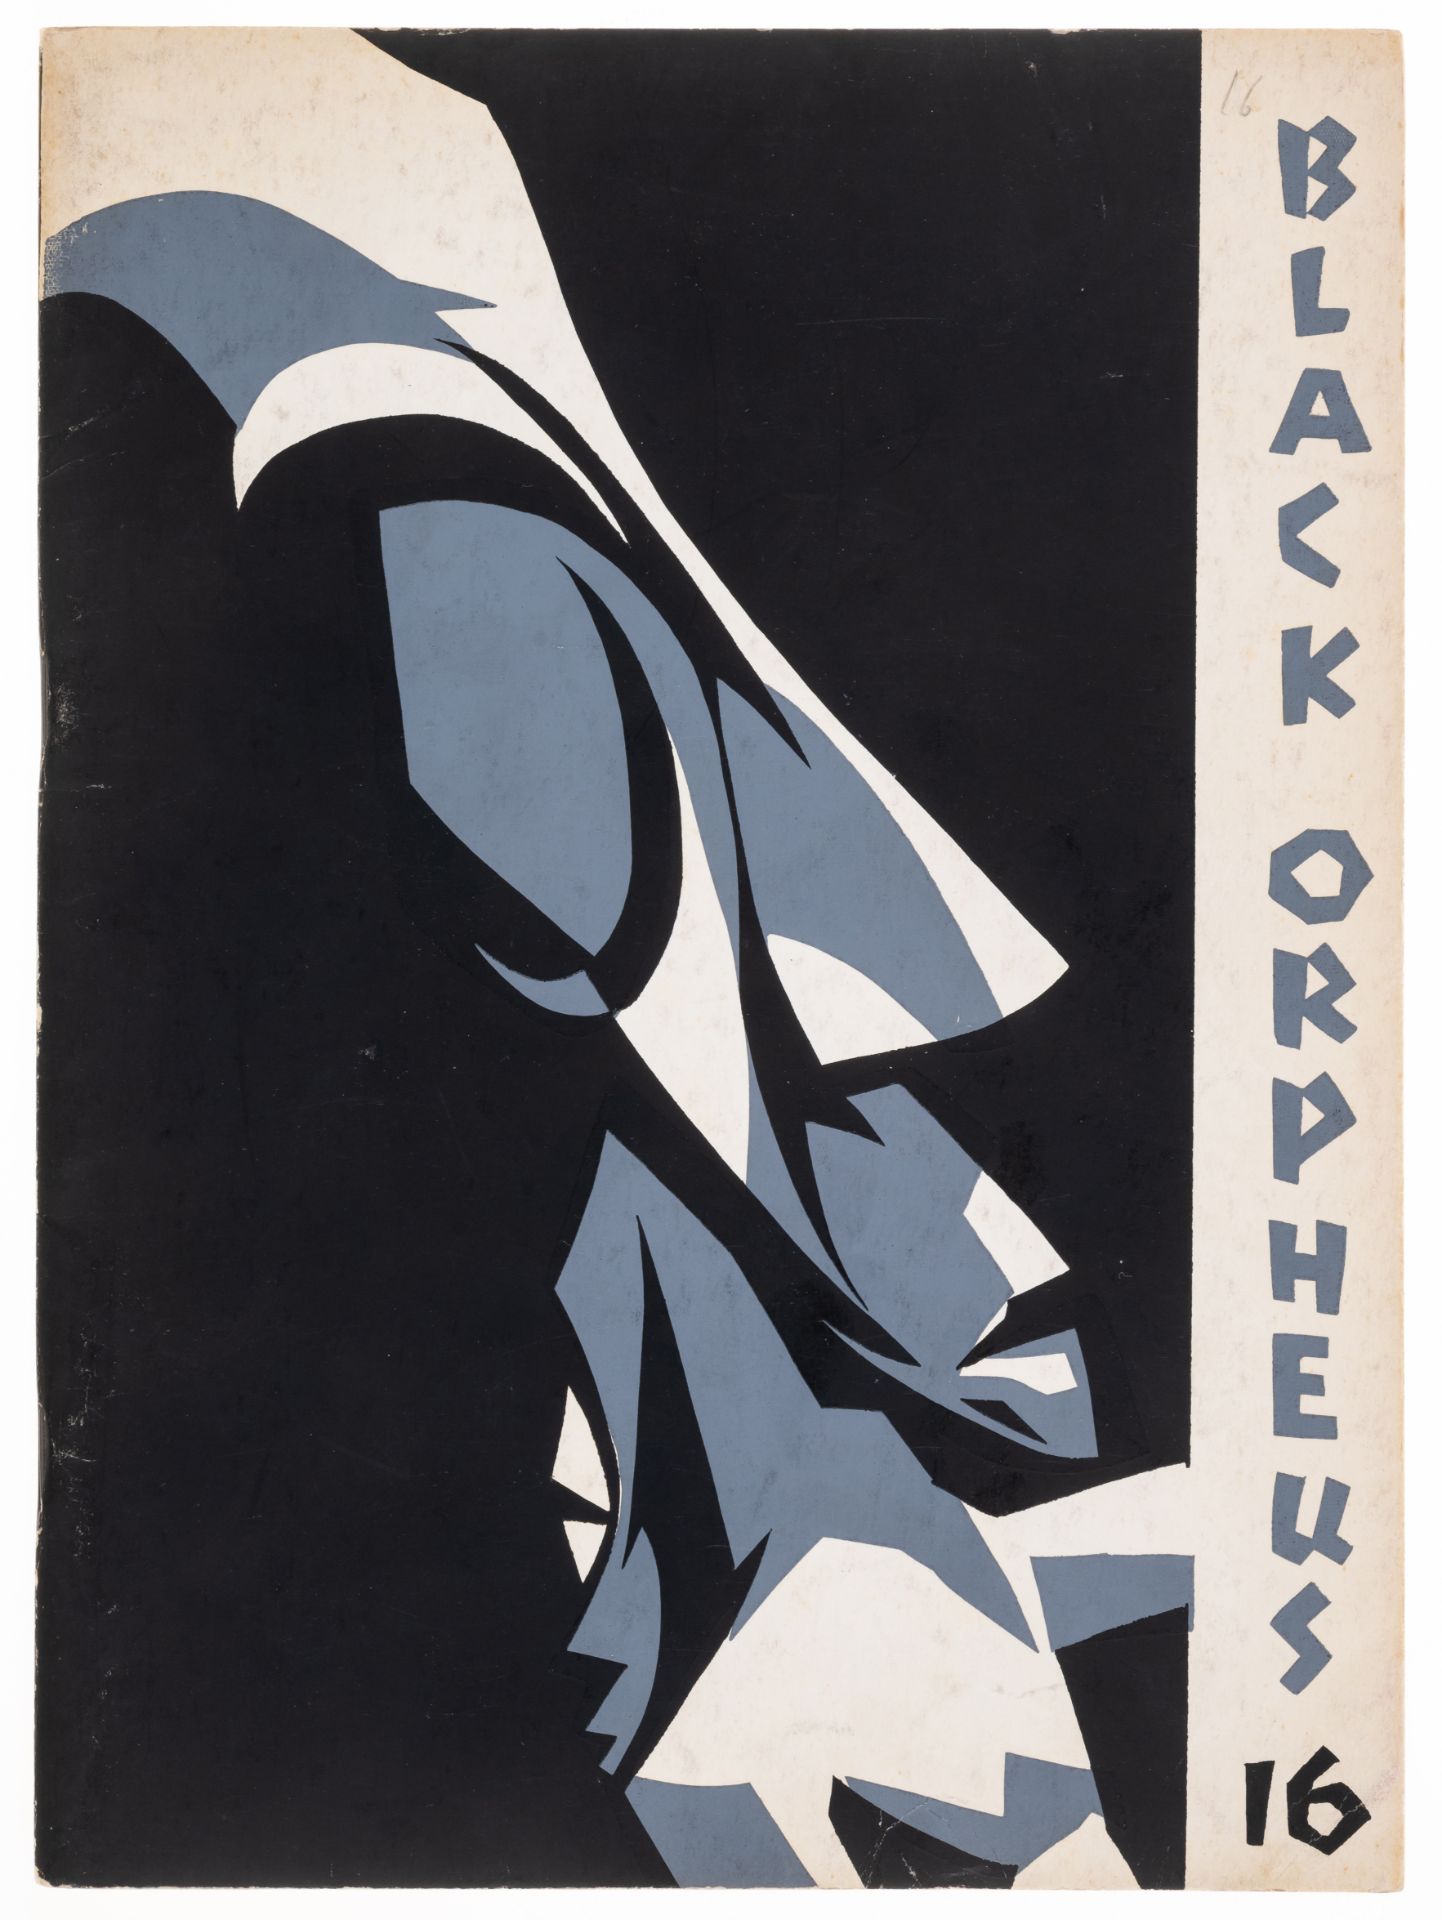 Black Orpheus: A Journal of African and Afro-American Literature, no.16, Nigeria, Mbari, 1964.